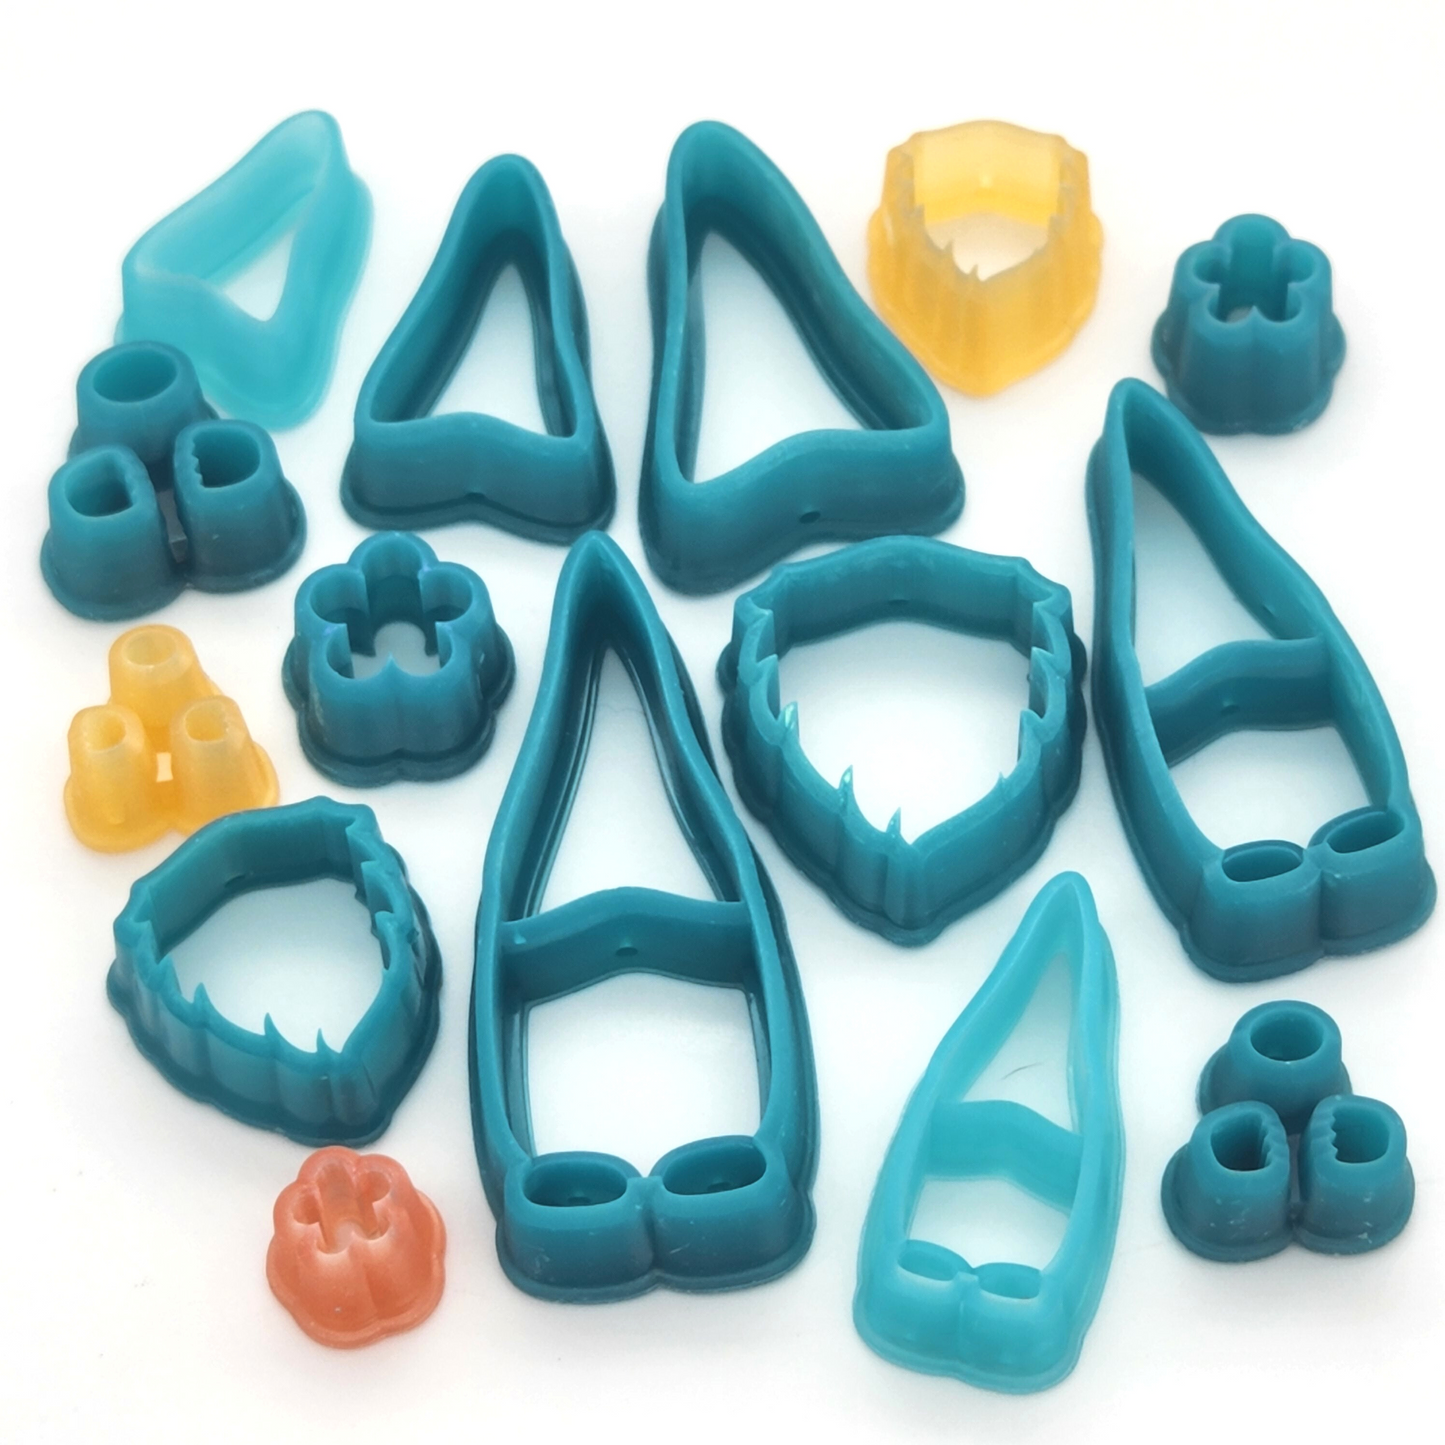 3D Printed Resin Garden Gnome polymer clay cutter set details